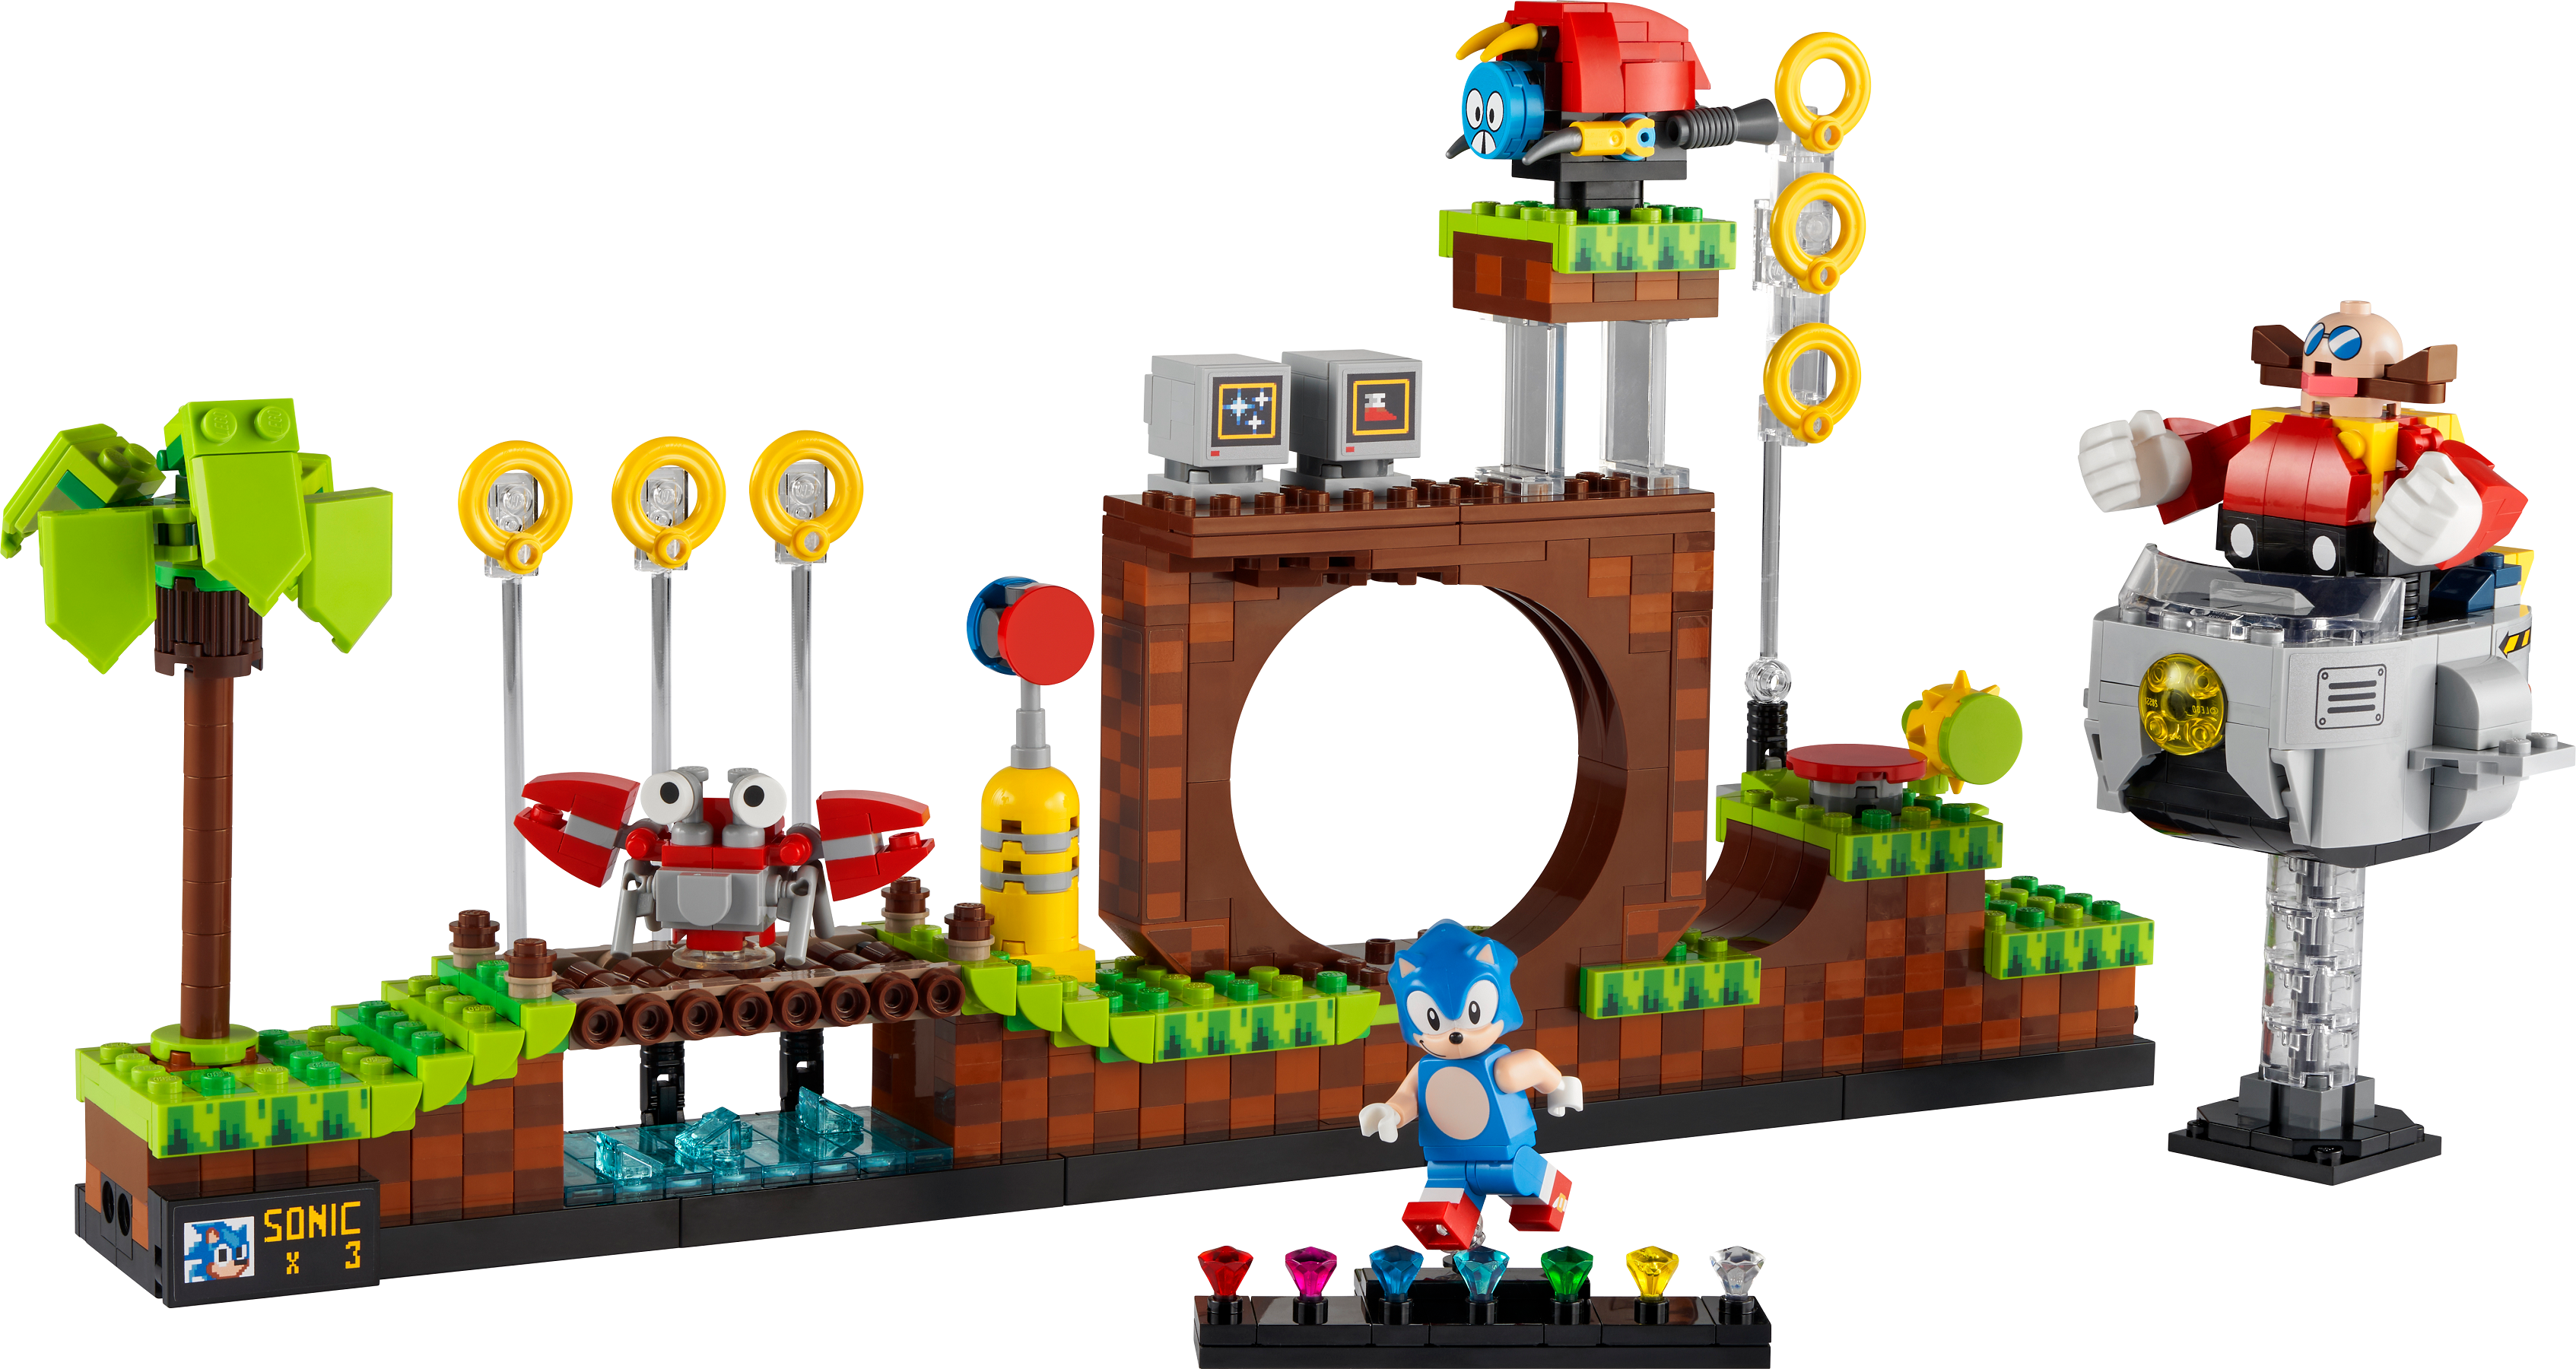 Obediencia Murciélago marido Sonic the Hedgehog™ – Green Hill Zone 21331 | Ideas | Buy online at the  Official LEGO® Shop US